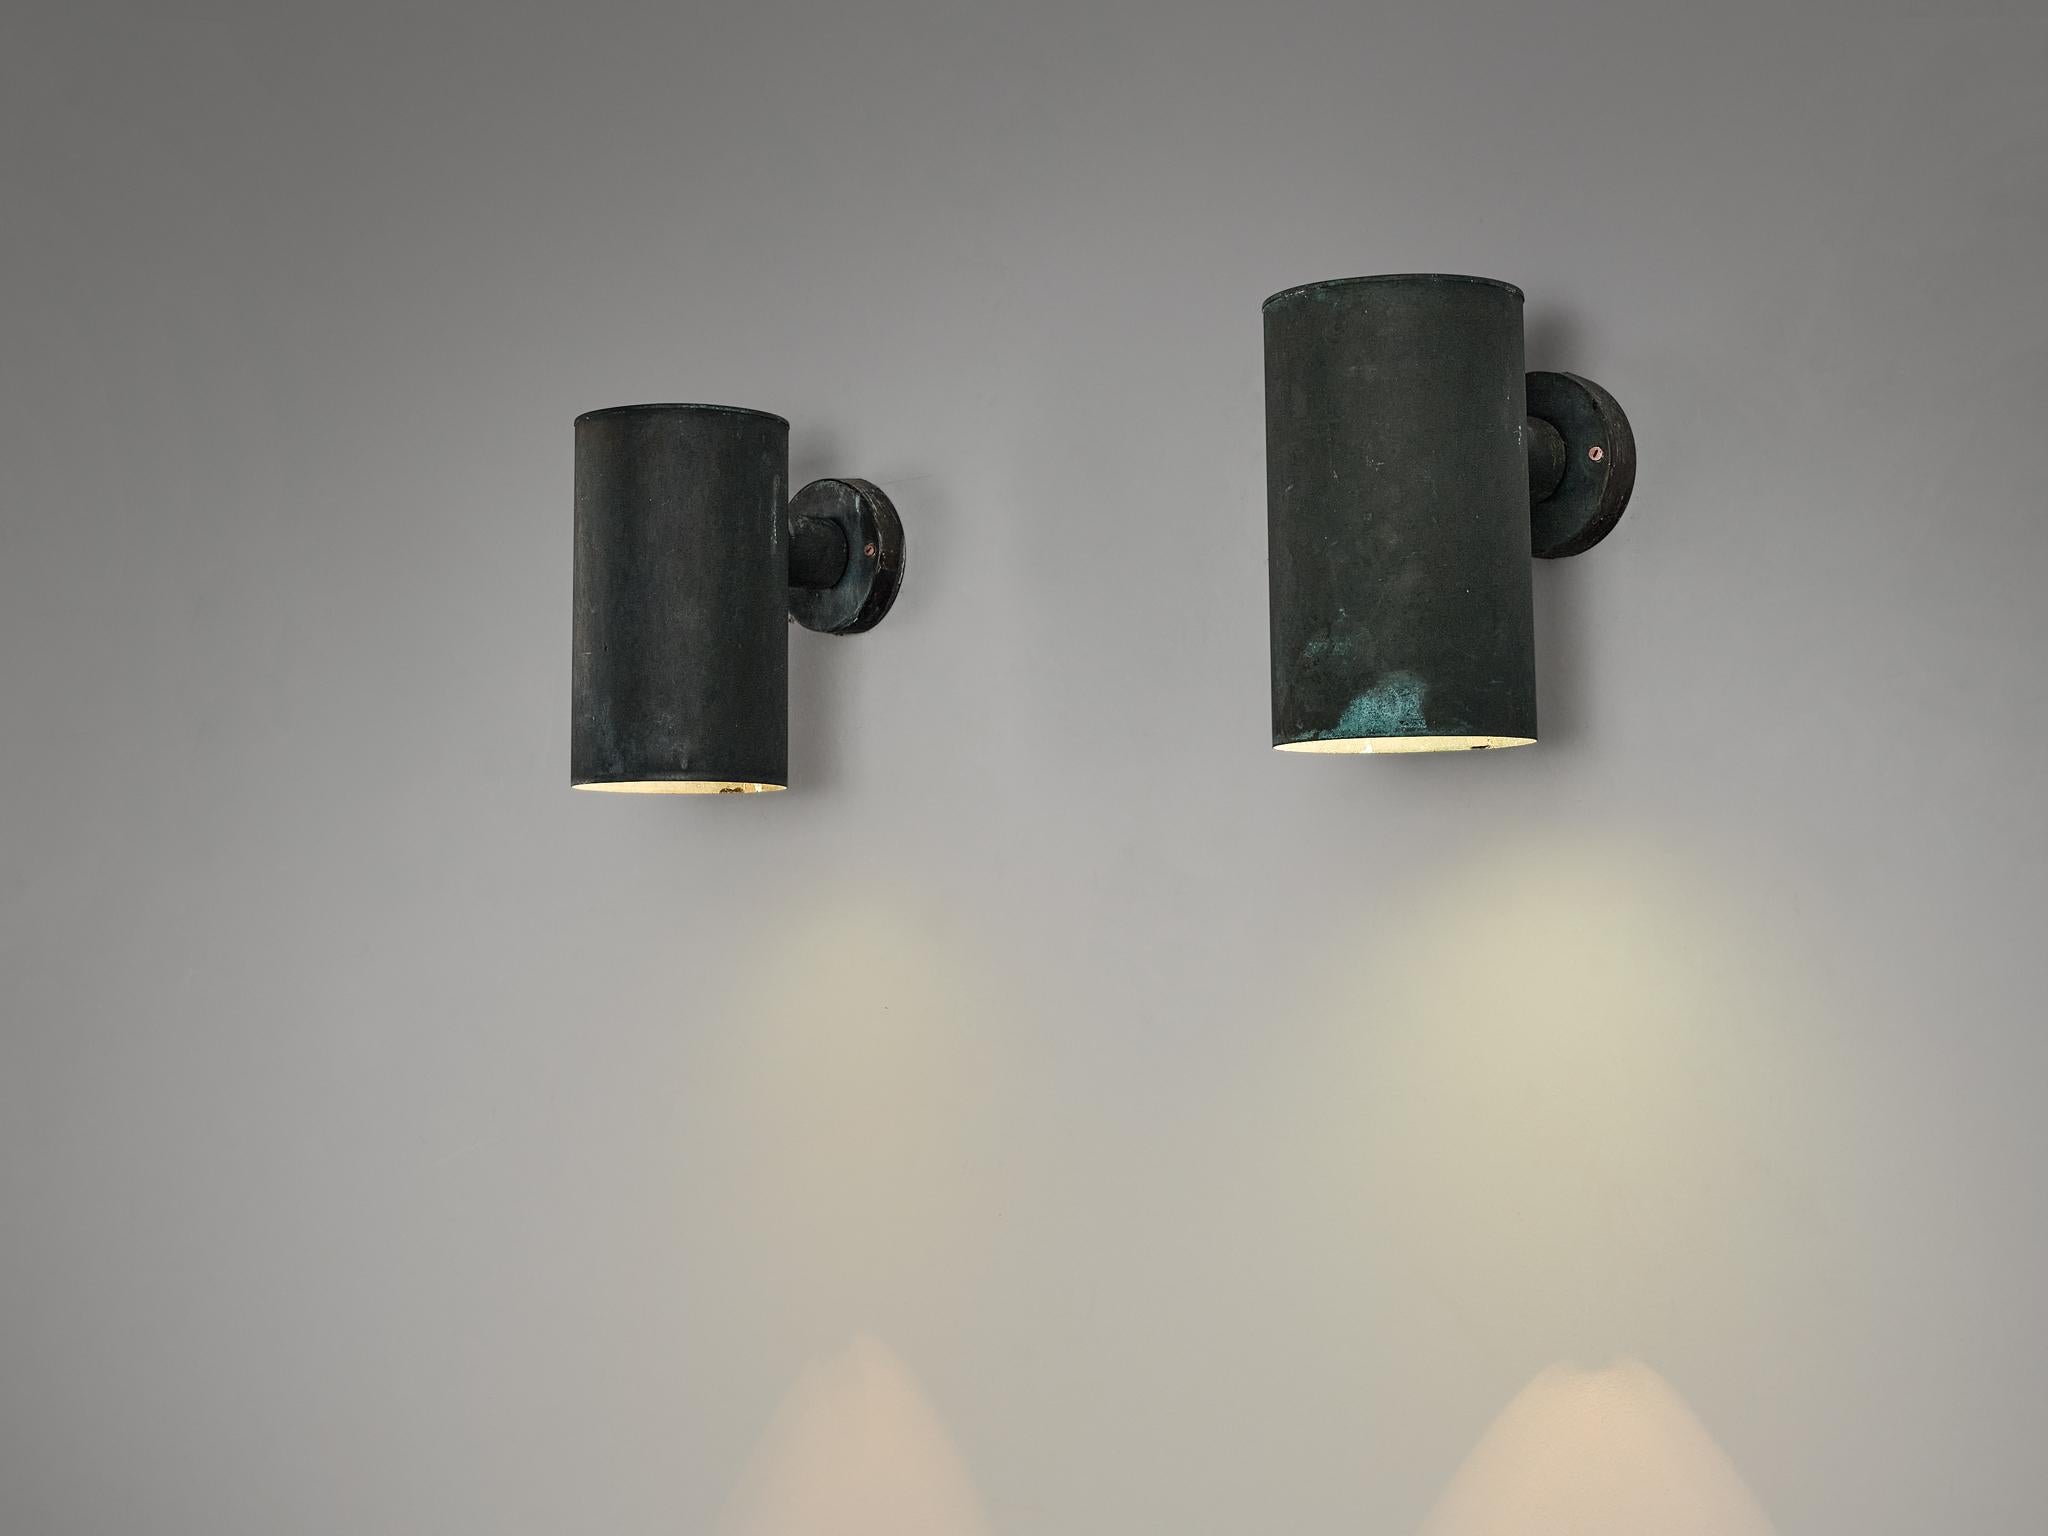 Fagerhult, wall lights, copper, Sweden, 1960s.

This design features a cylindric lampshade that is connected to a circular fixation. The surface obtained admirable patina over the years which contributes to the authentic character of the lamp. These